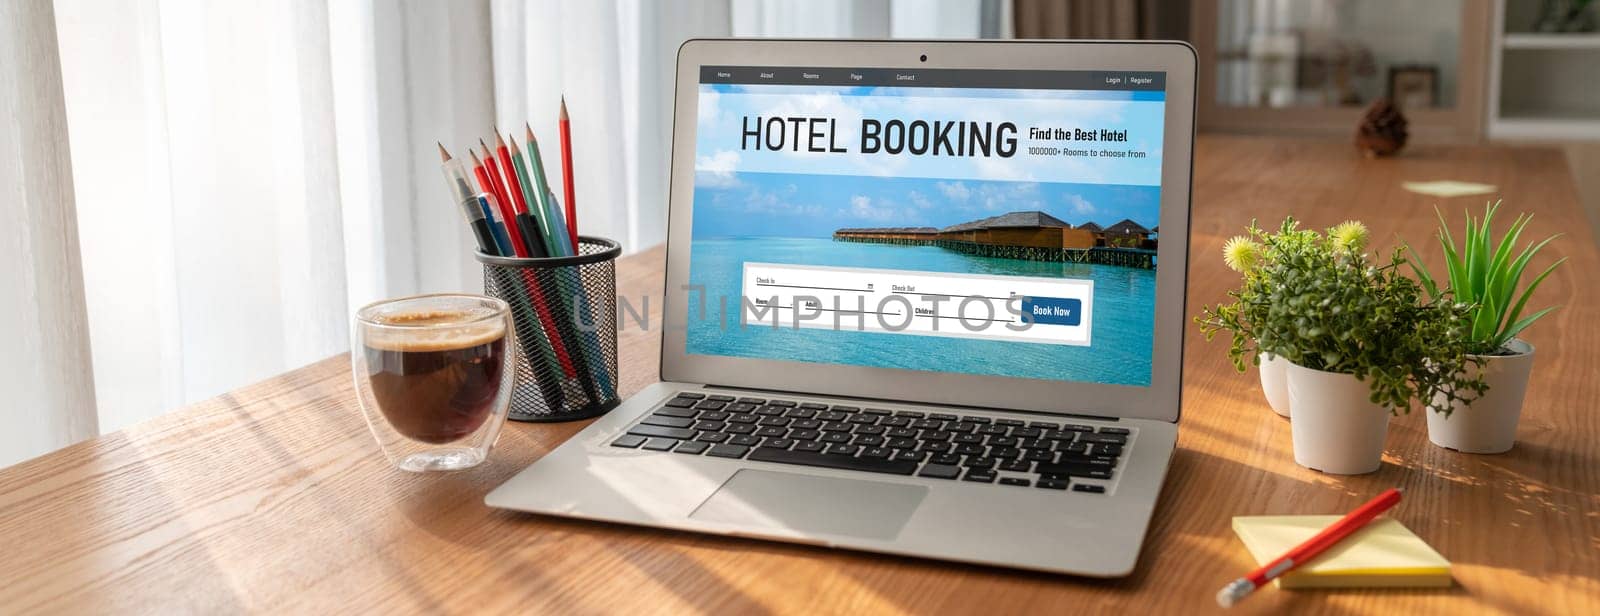 Online hotel accommodation booking website provide modish reservation system by biancoblue